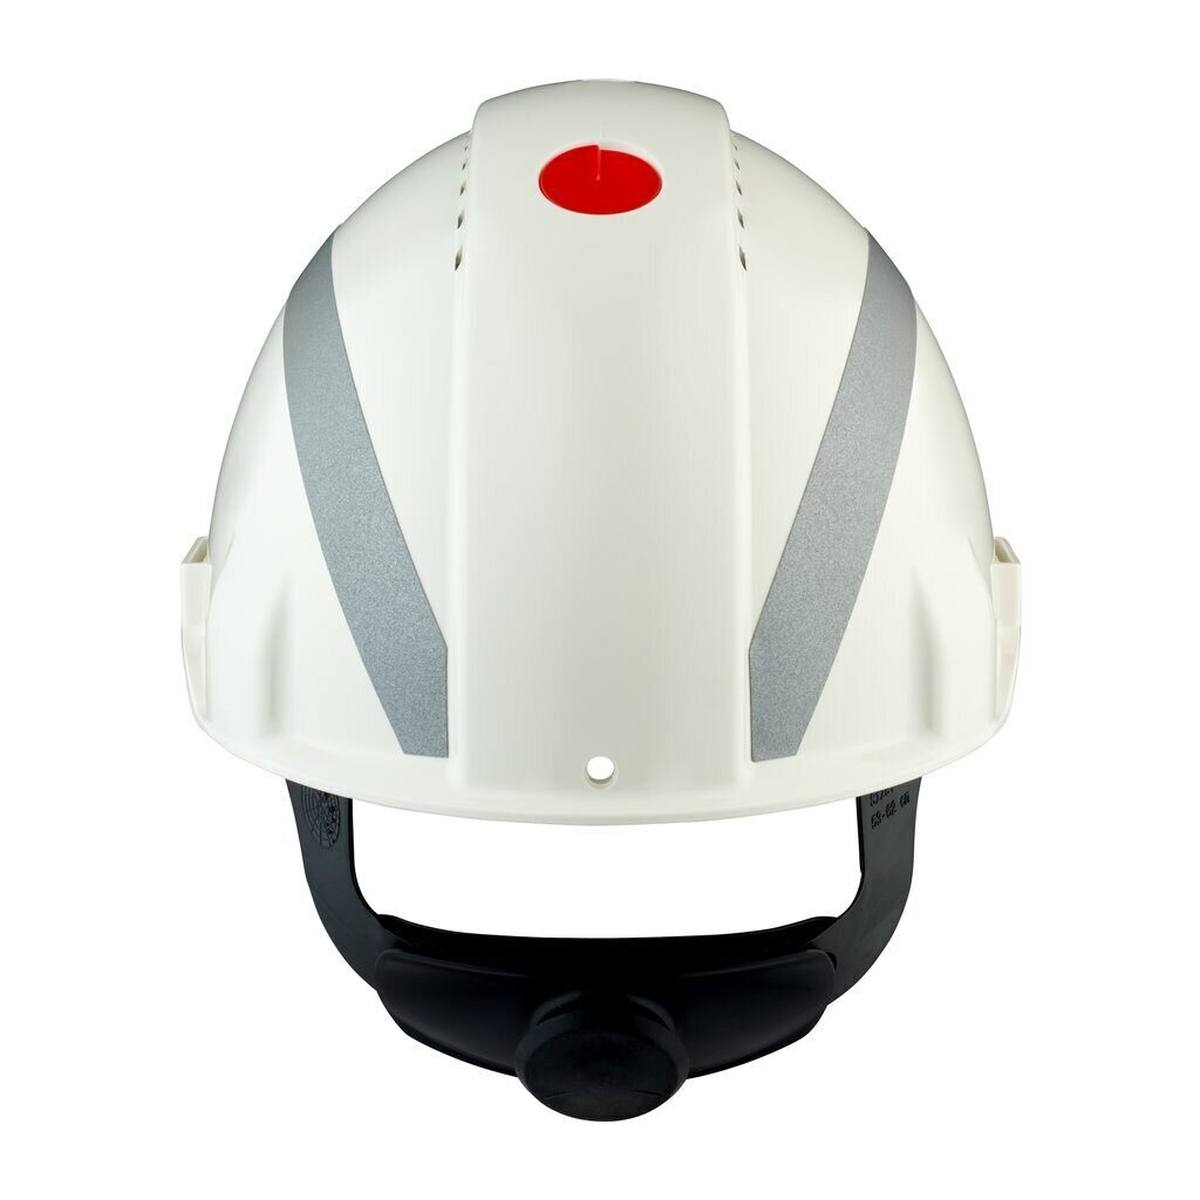 3M G3000 safety helmet with UV indicator, white, ABS, ventilated ratchet fastener, plastic sweatband, reflective sticker